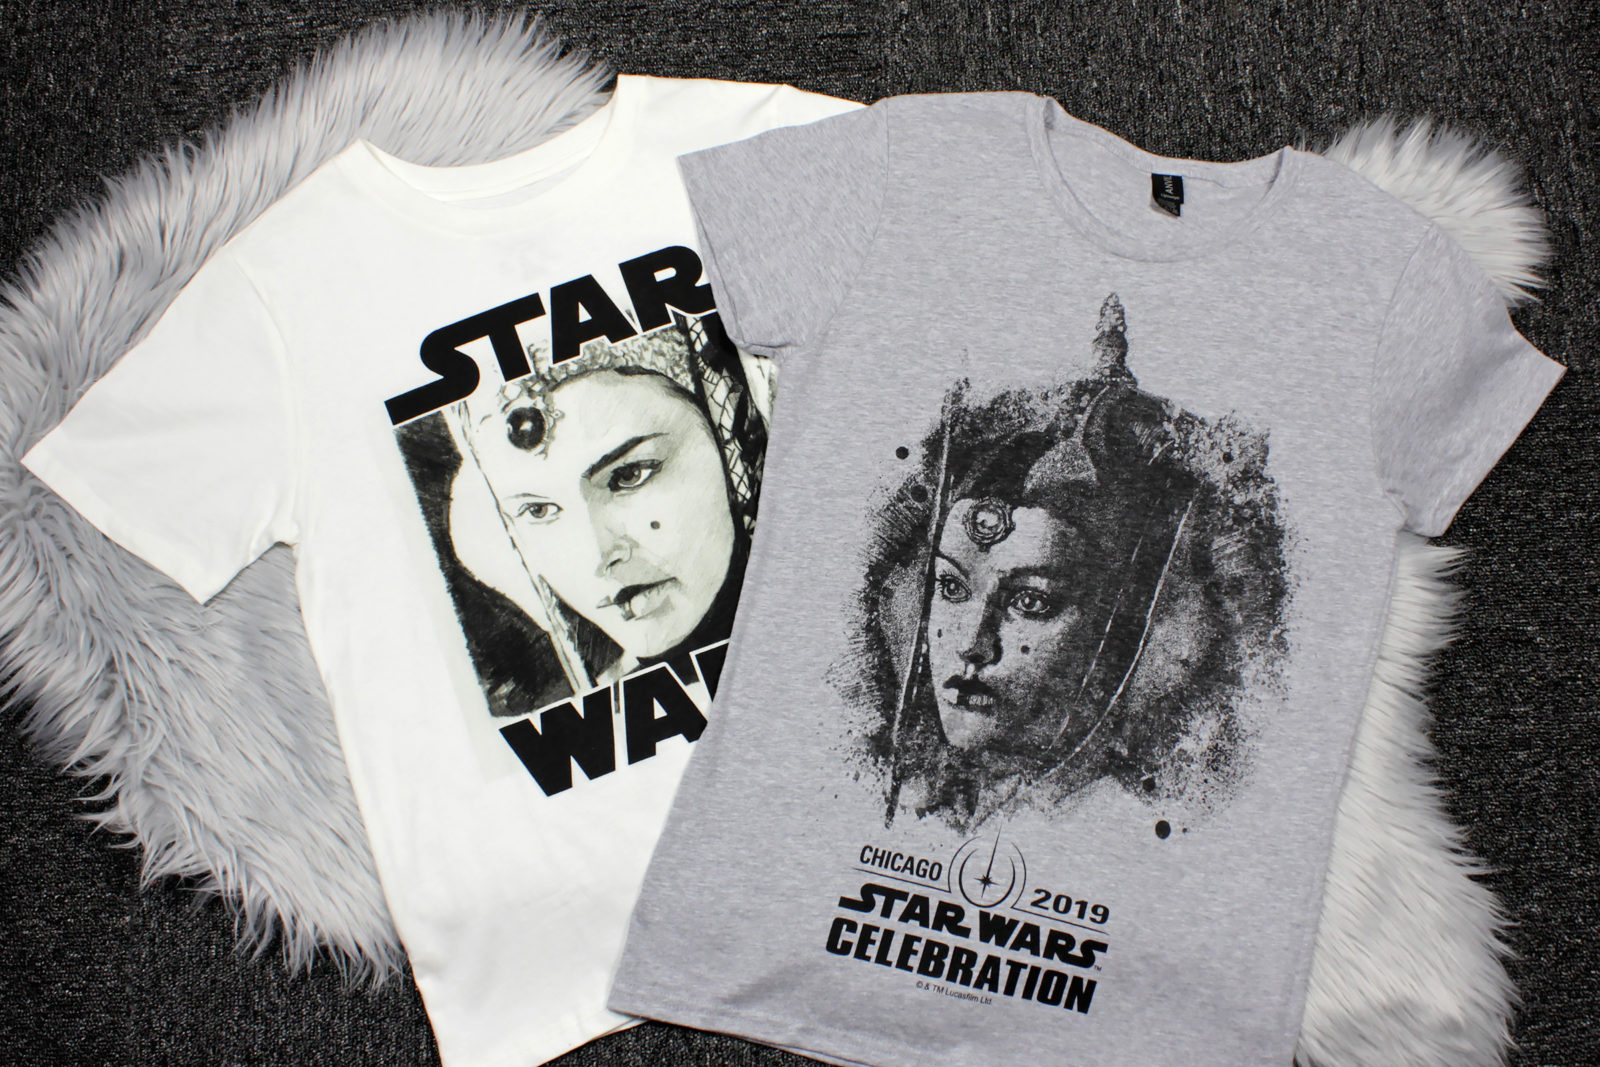 Star Wars The Phantom Menace Queen Amidala T-Shirts from Forever 21 and Star Wars Celebration Chicago